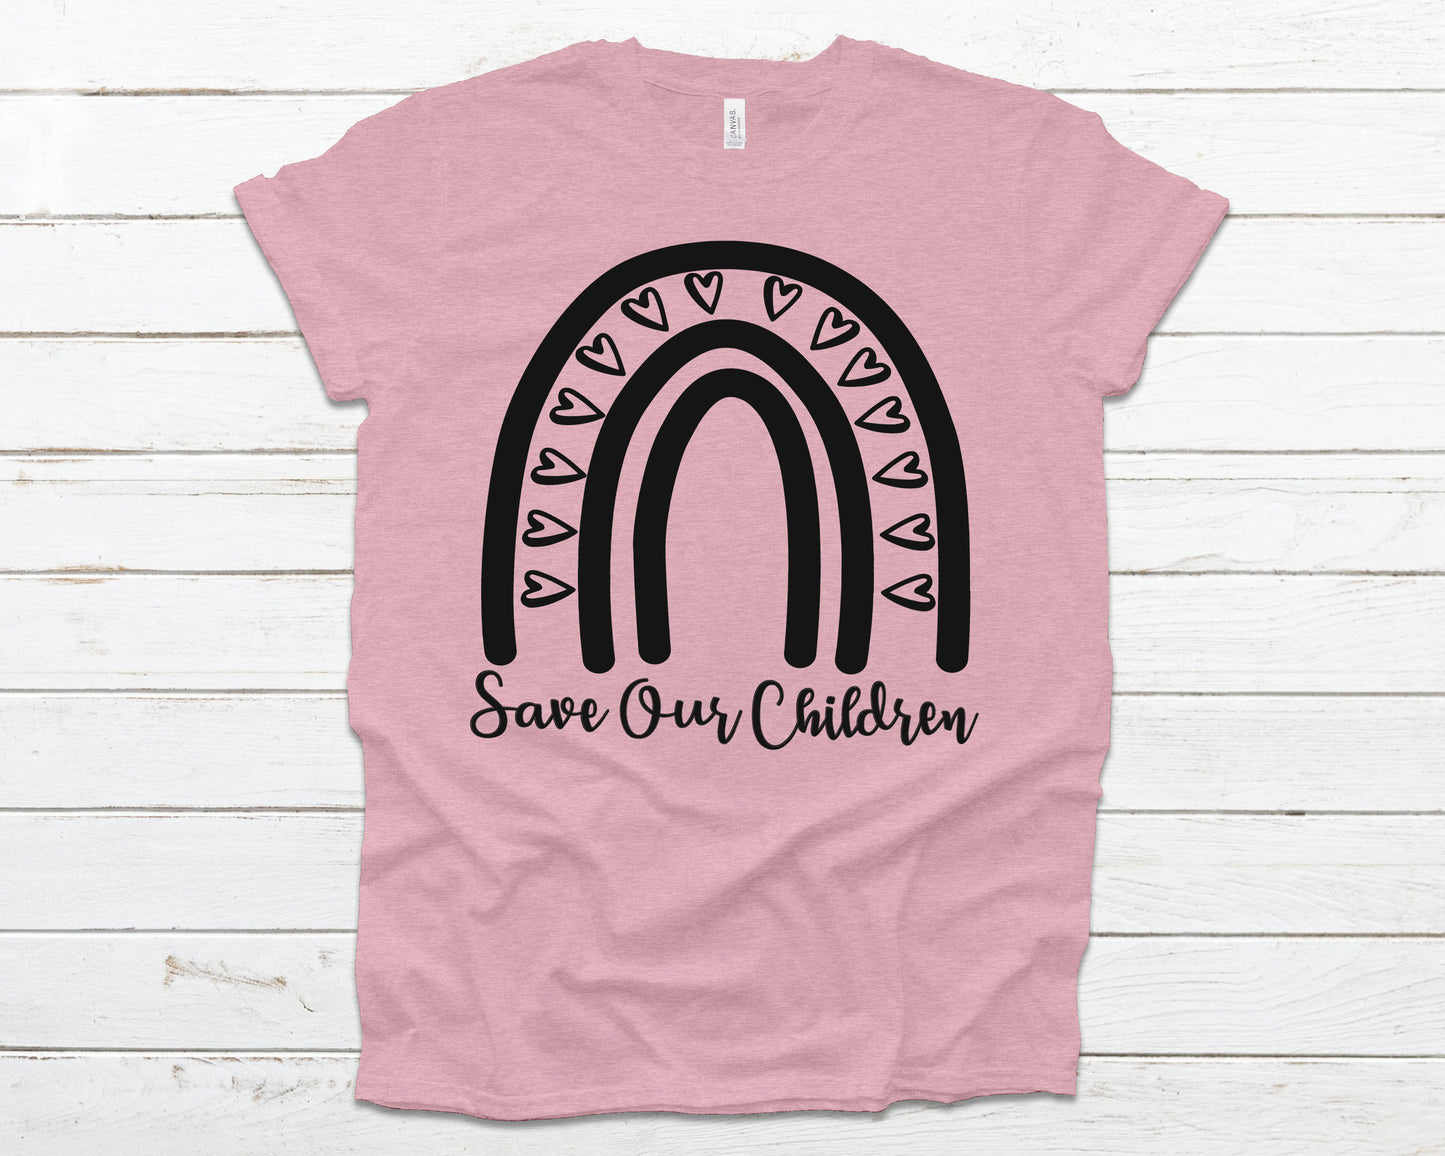 Save our Children - End human trafficking rainbow